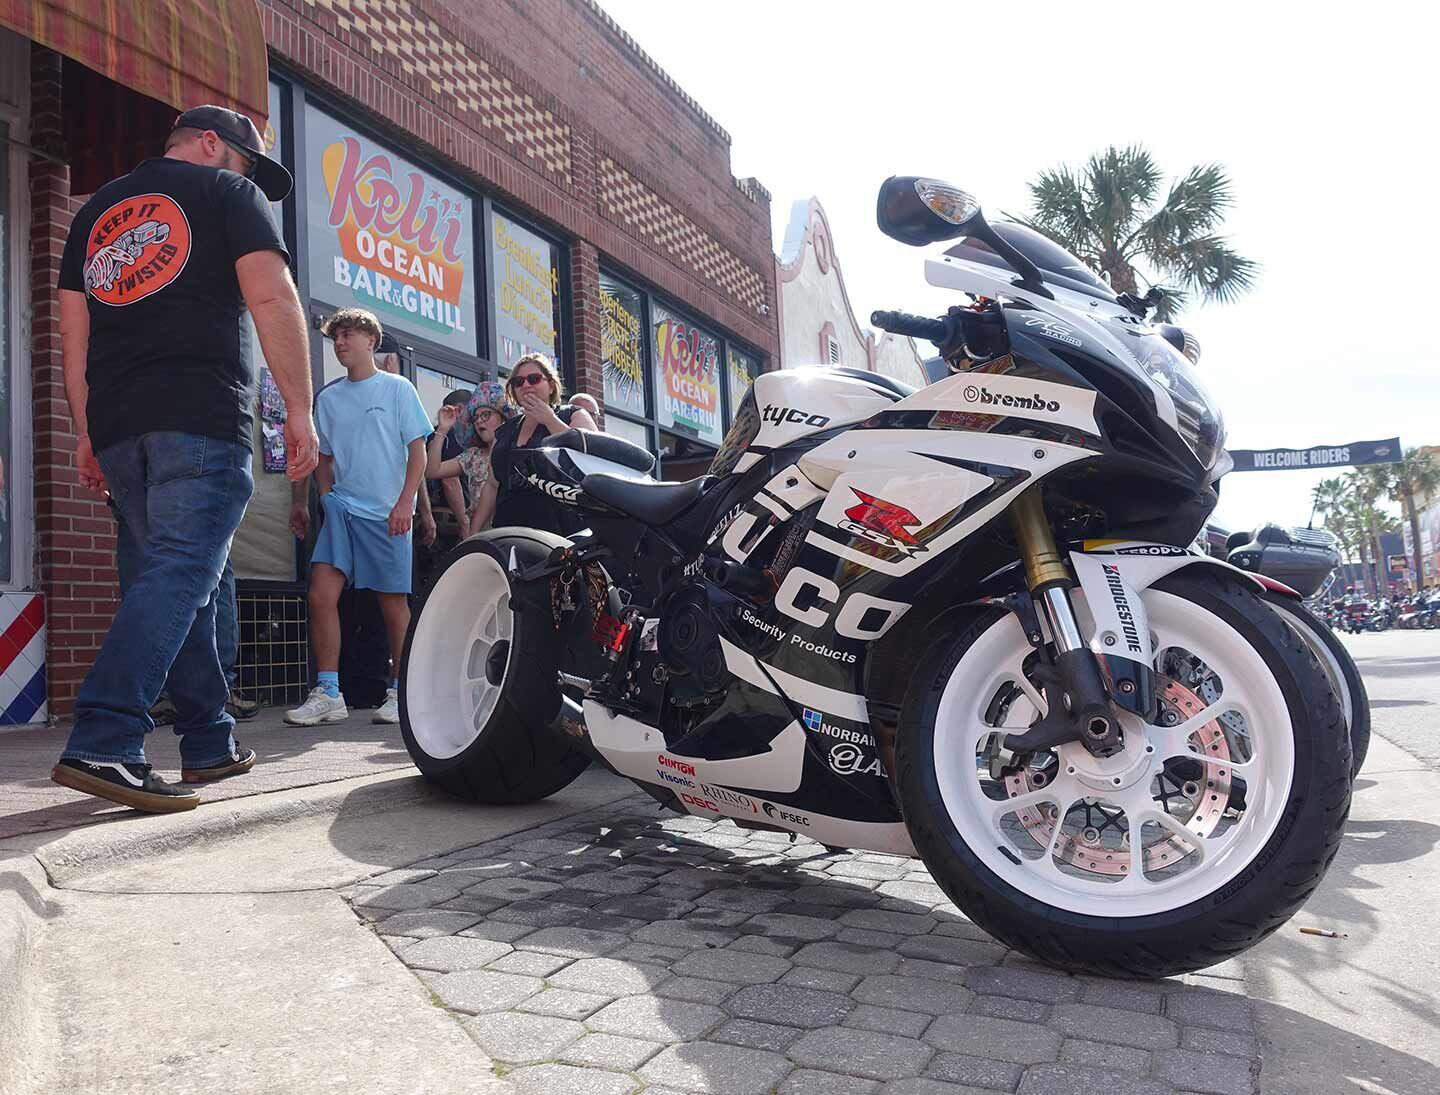 A clean, nicely tricked-out and painted Suzuki GSXR making the scene on Main Street.